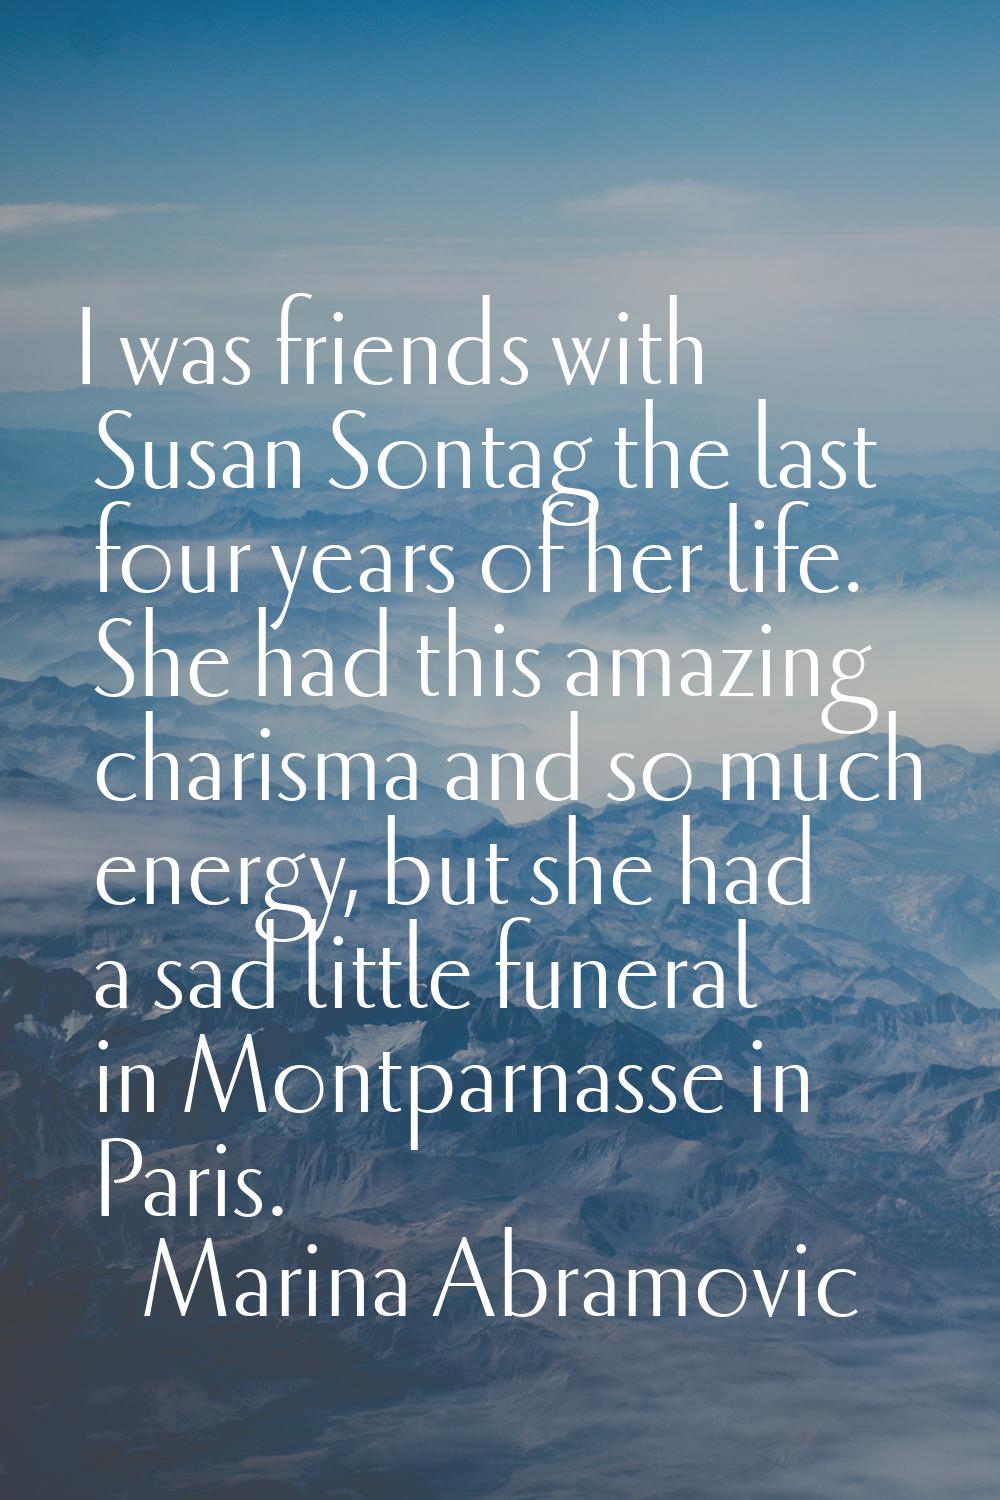 I was friends with Susan Sontag the last four years of her life. She had this amazing charisma and 